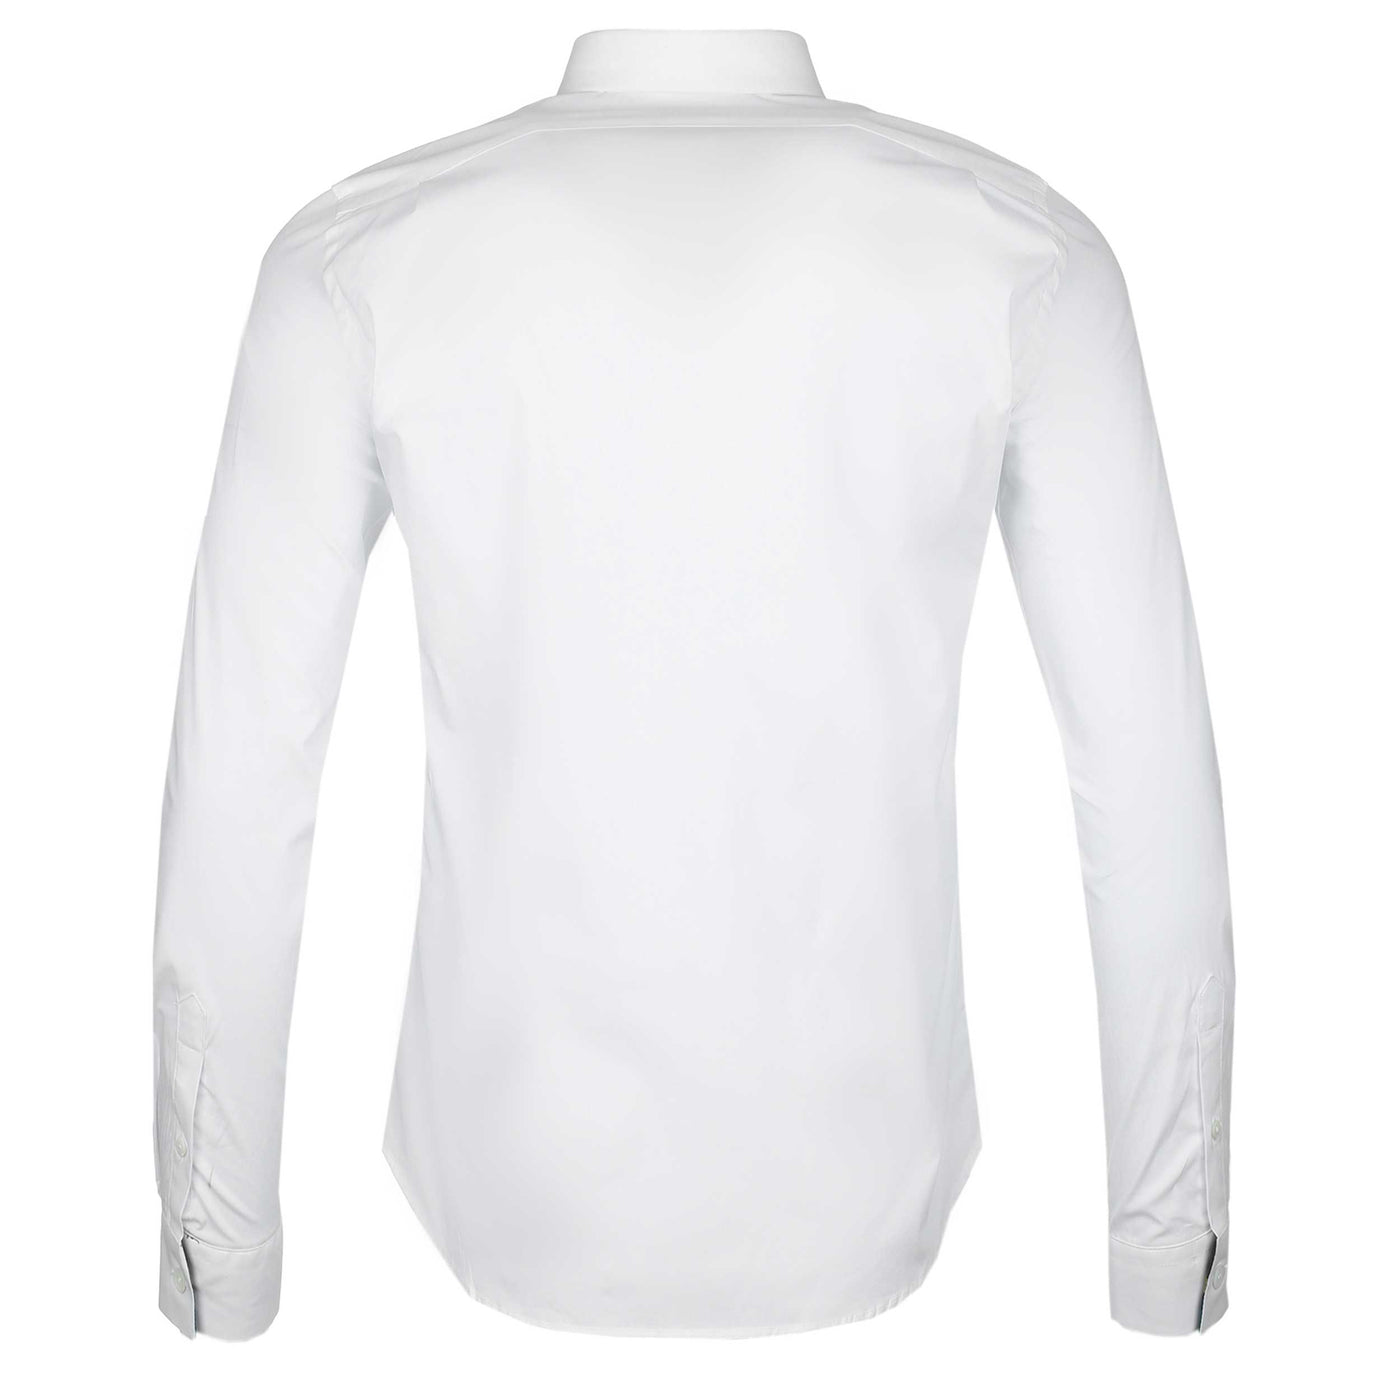 Paul Smith Tailored Fit Plain Shirt in White